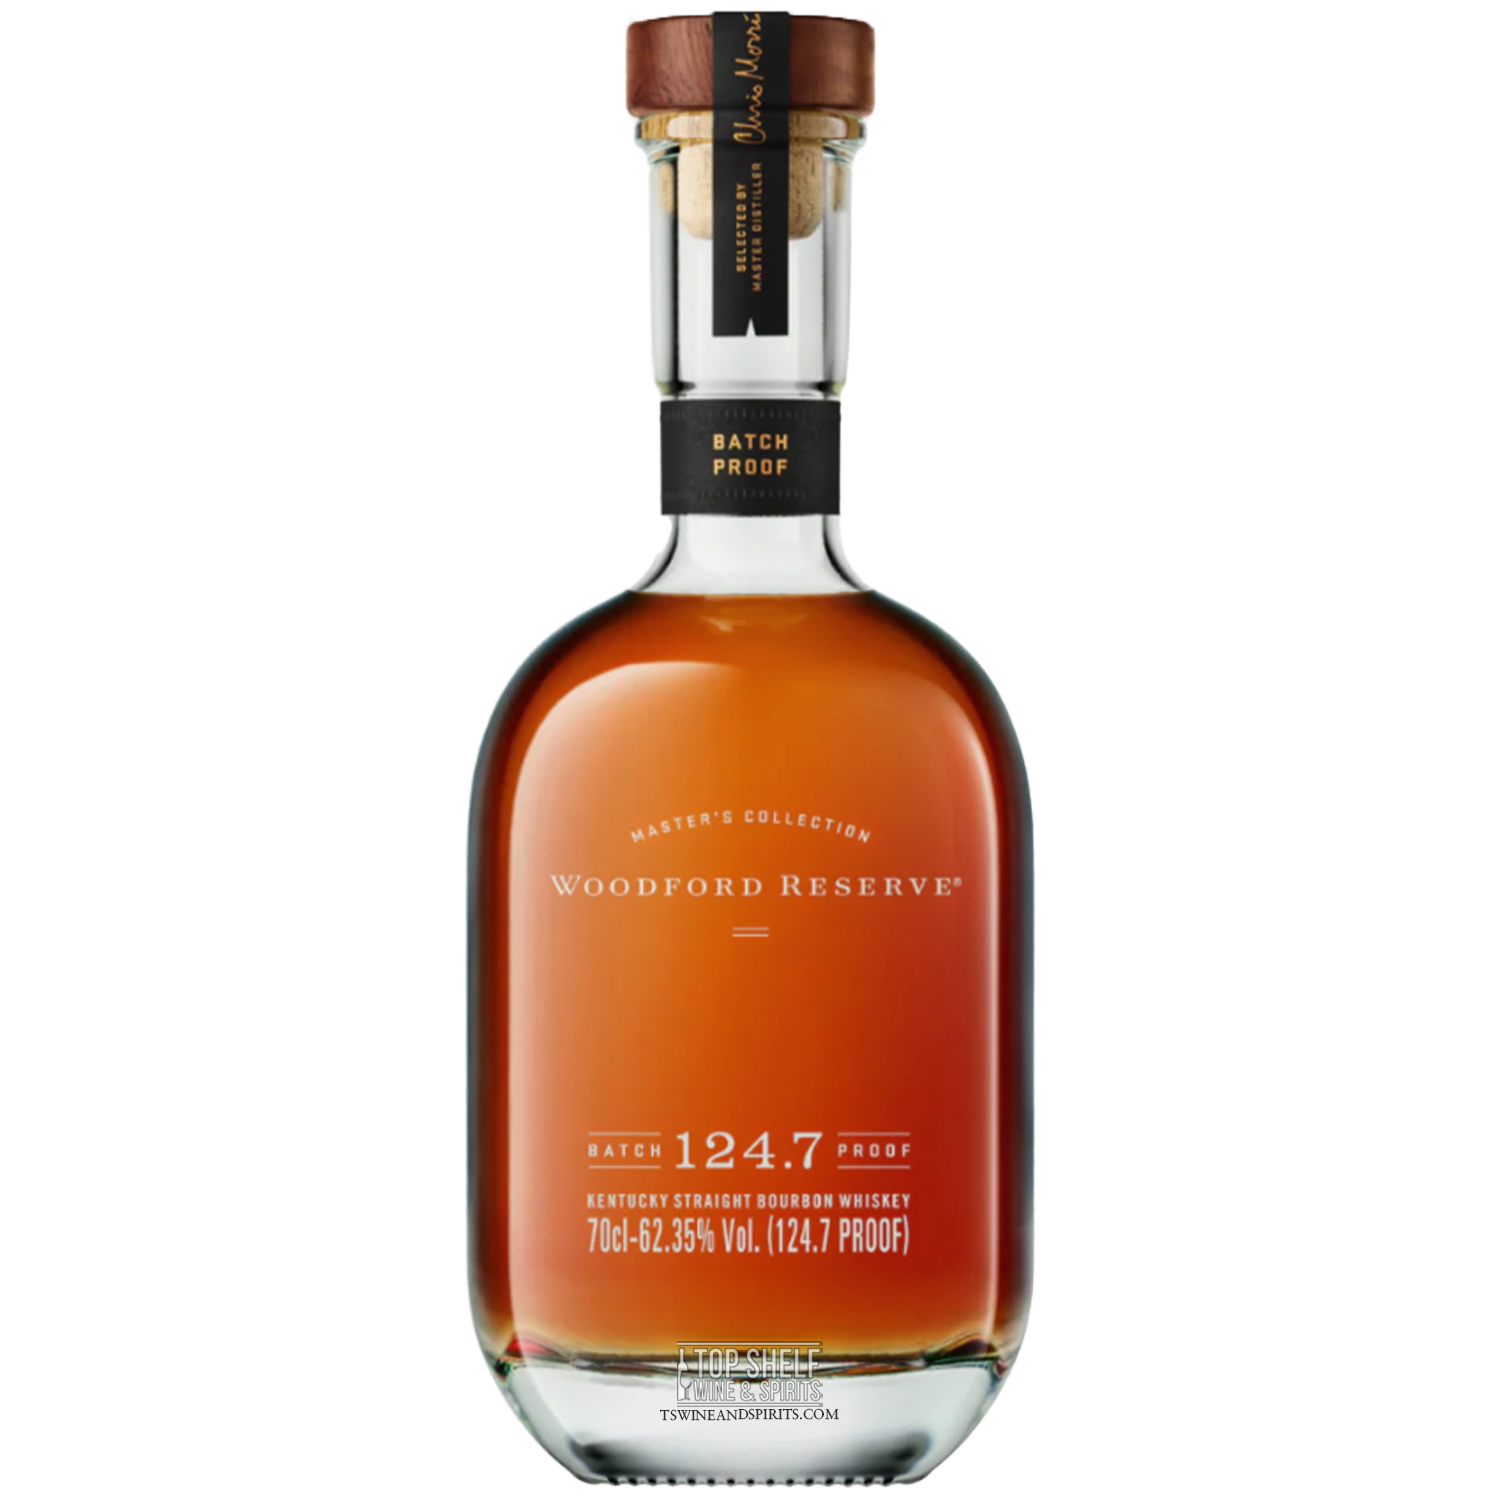 Woodford Reserve Master's Collection by Chris Morris 124.7 Proof Kentucky Straight Bourbon